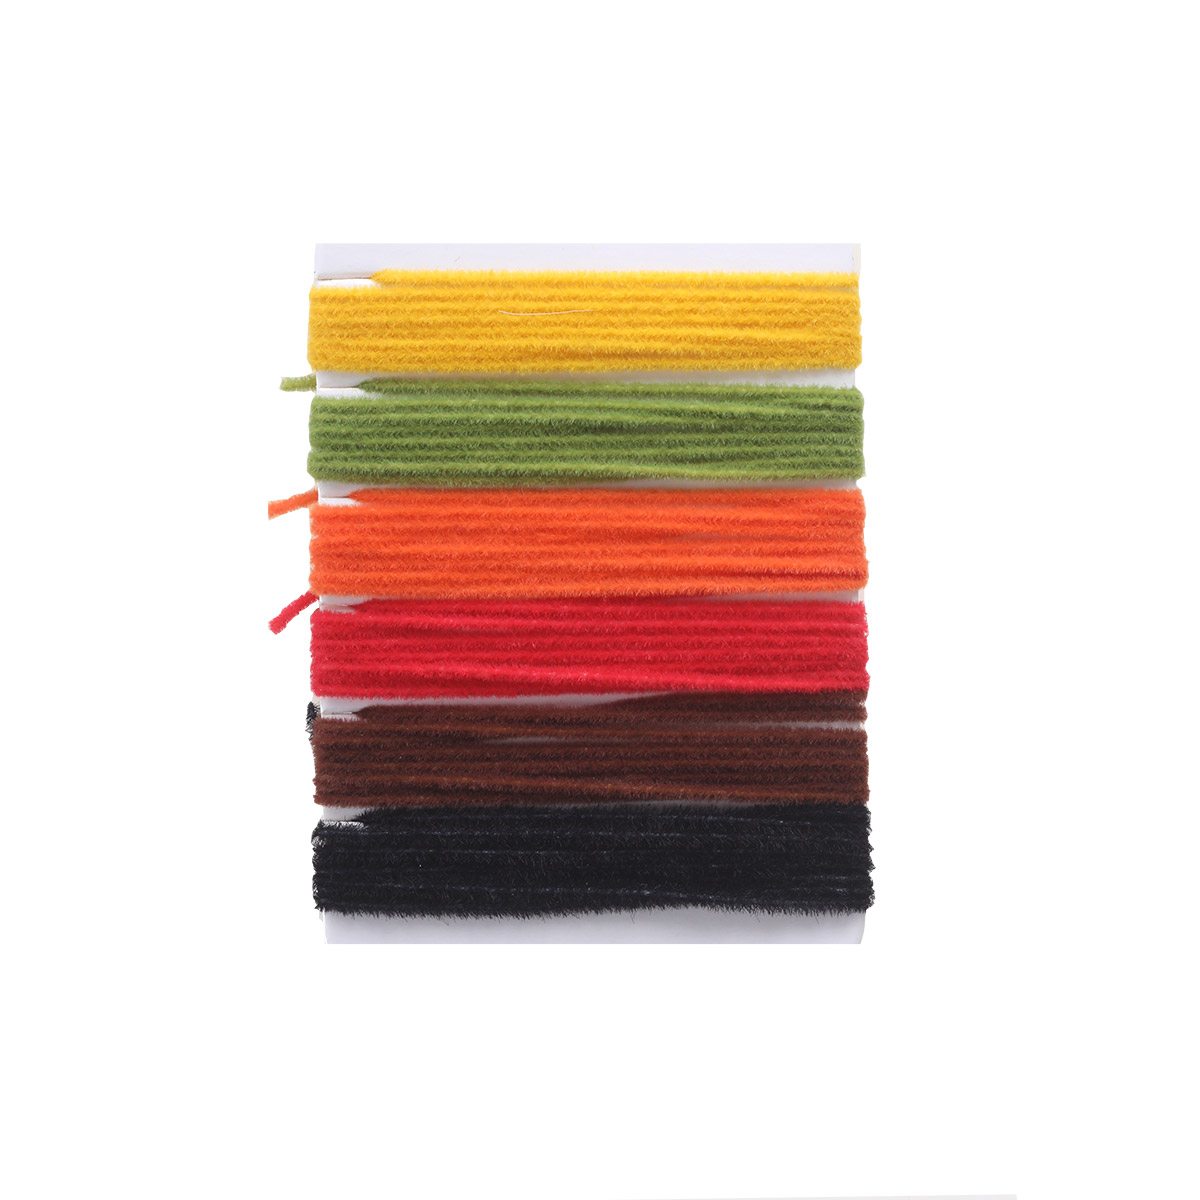 Textreme Microchenille Assorted Colors